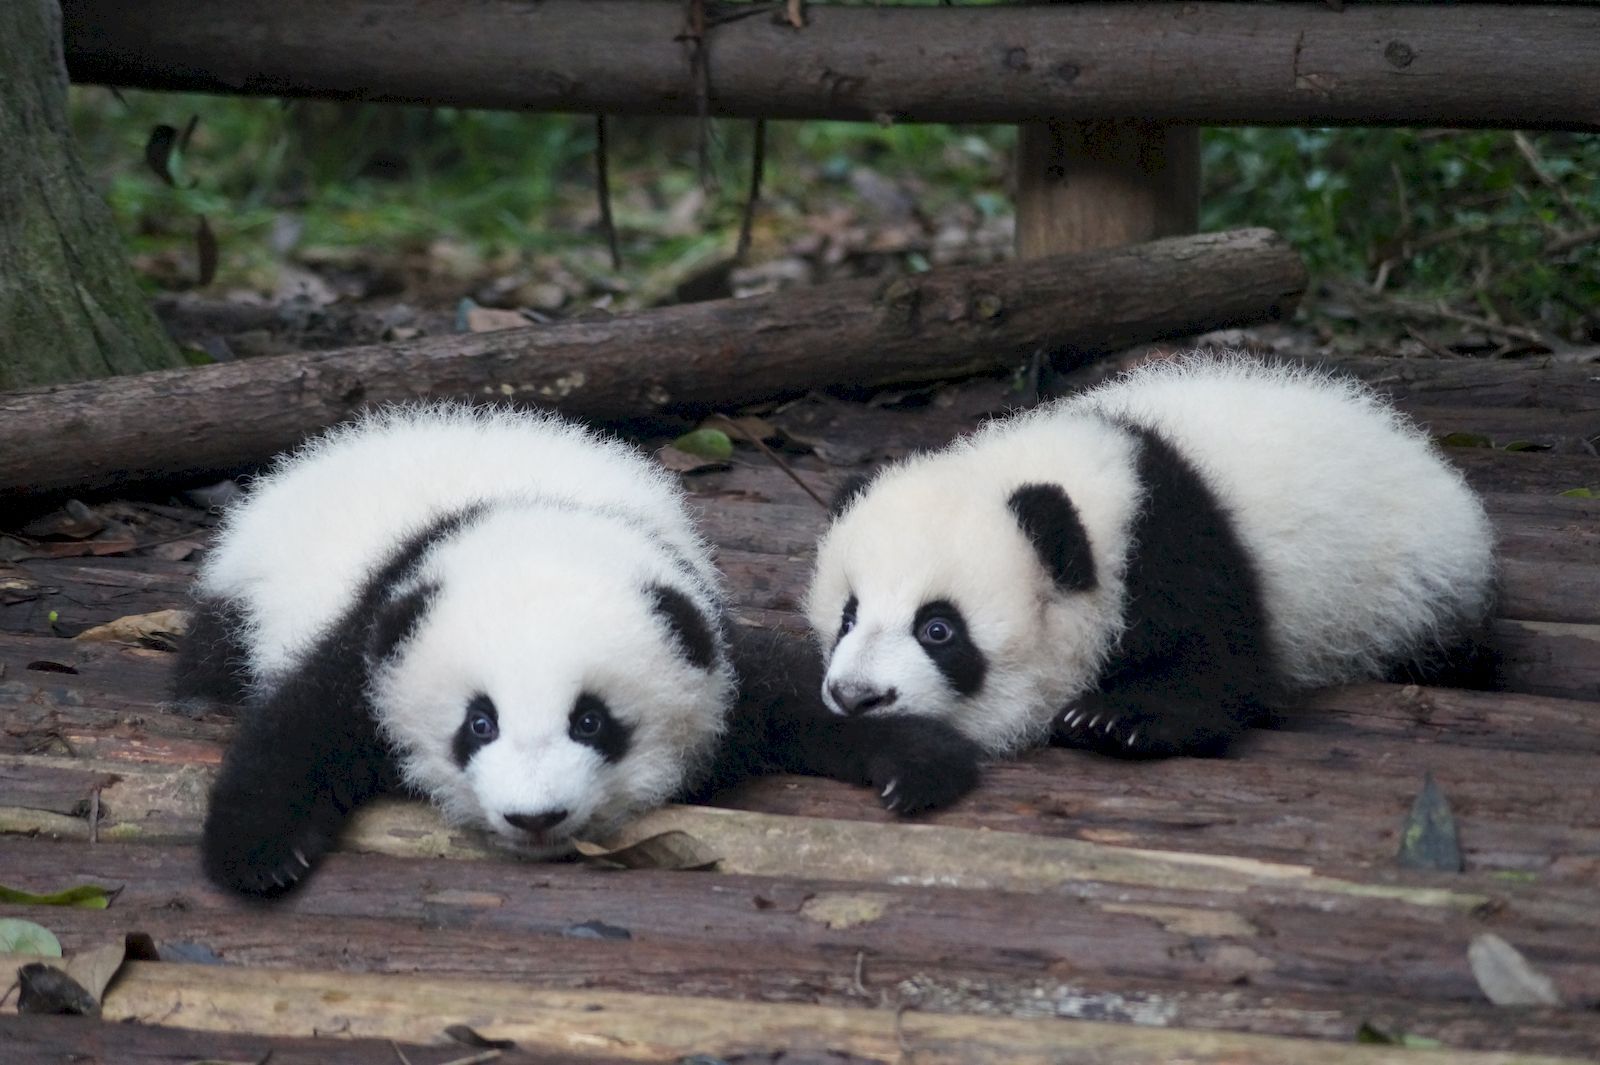 Check out: Your itinerary to Chengdu